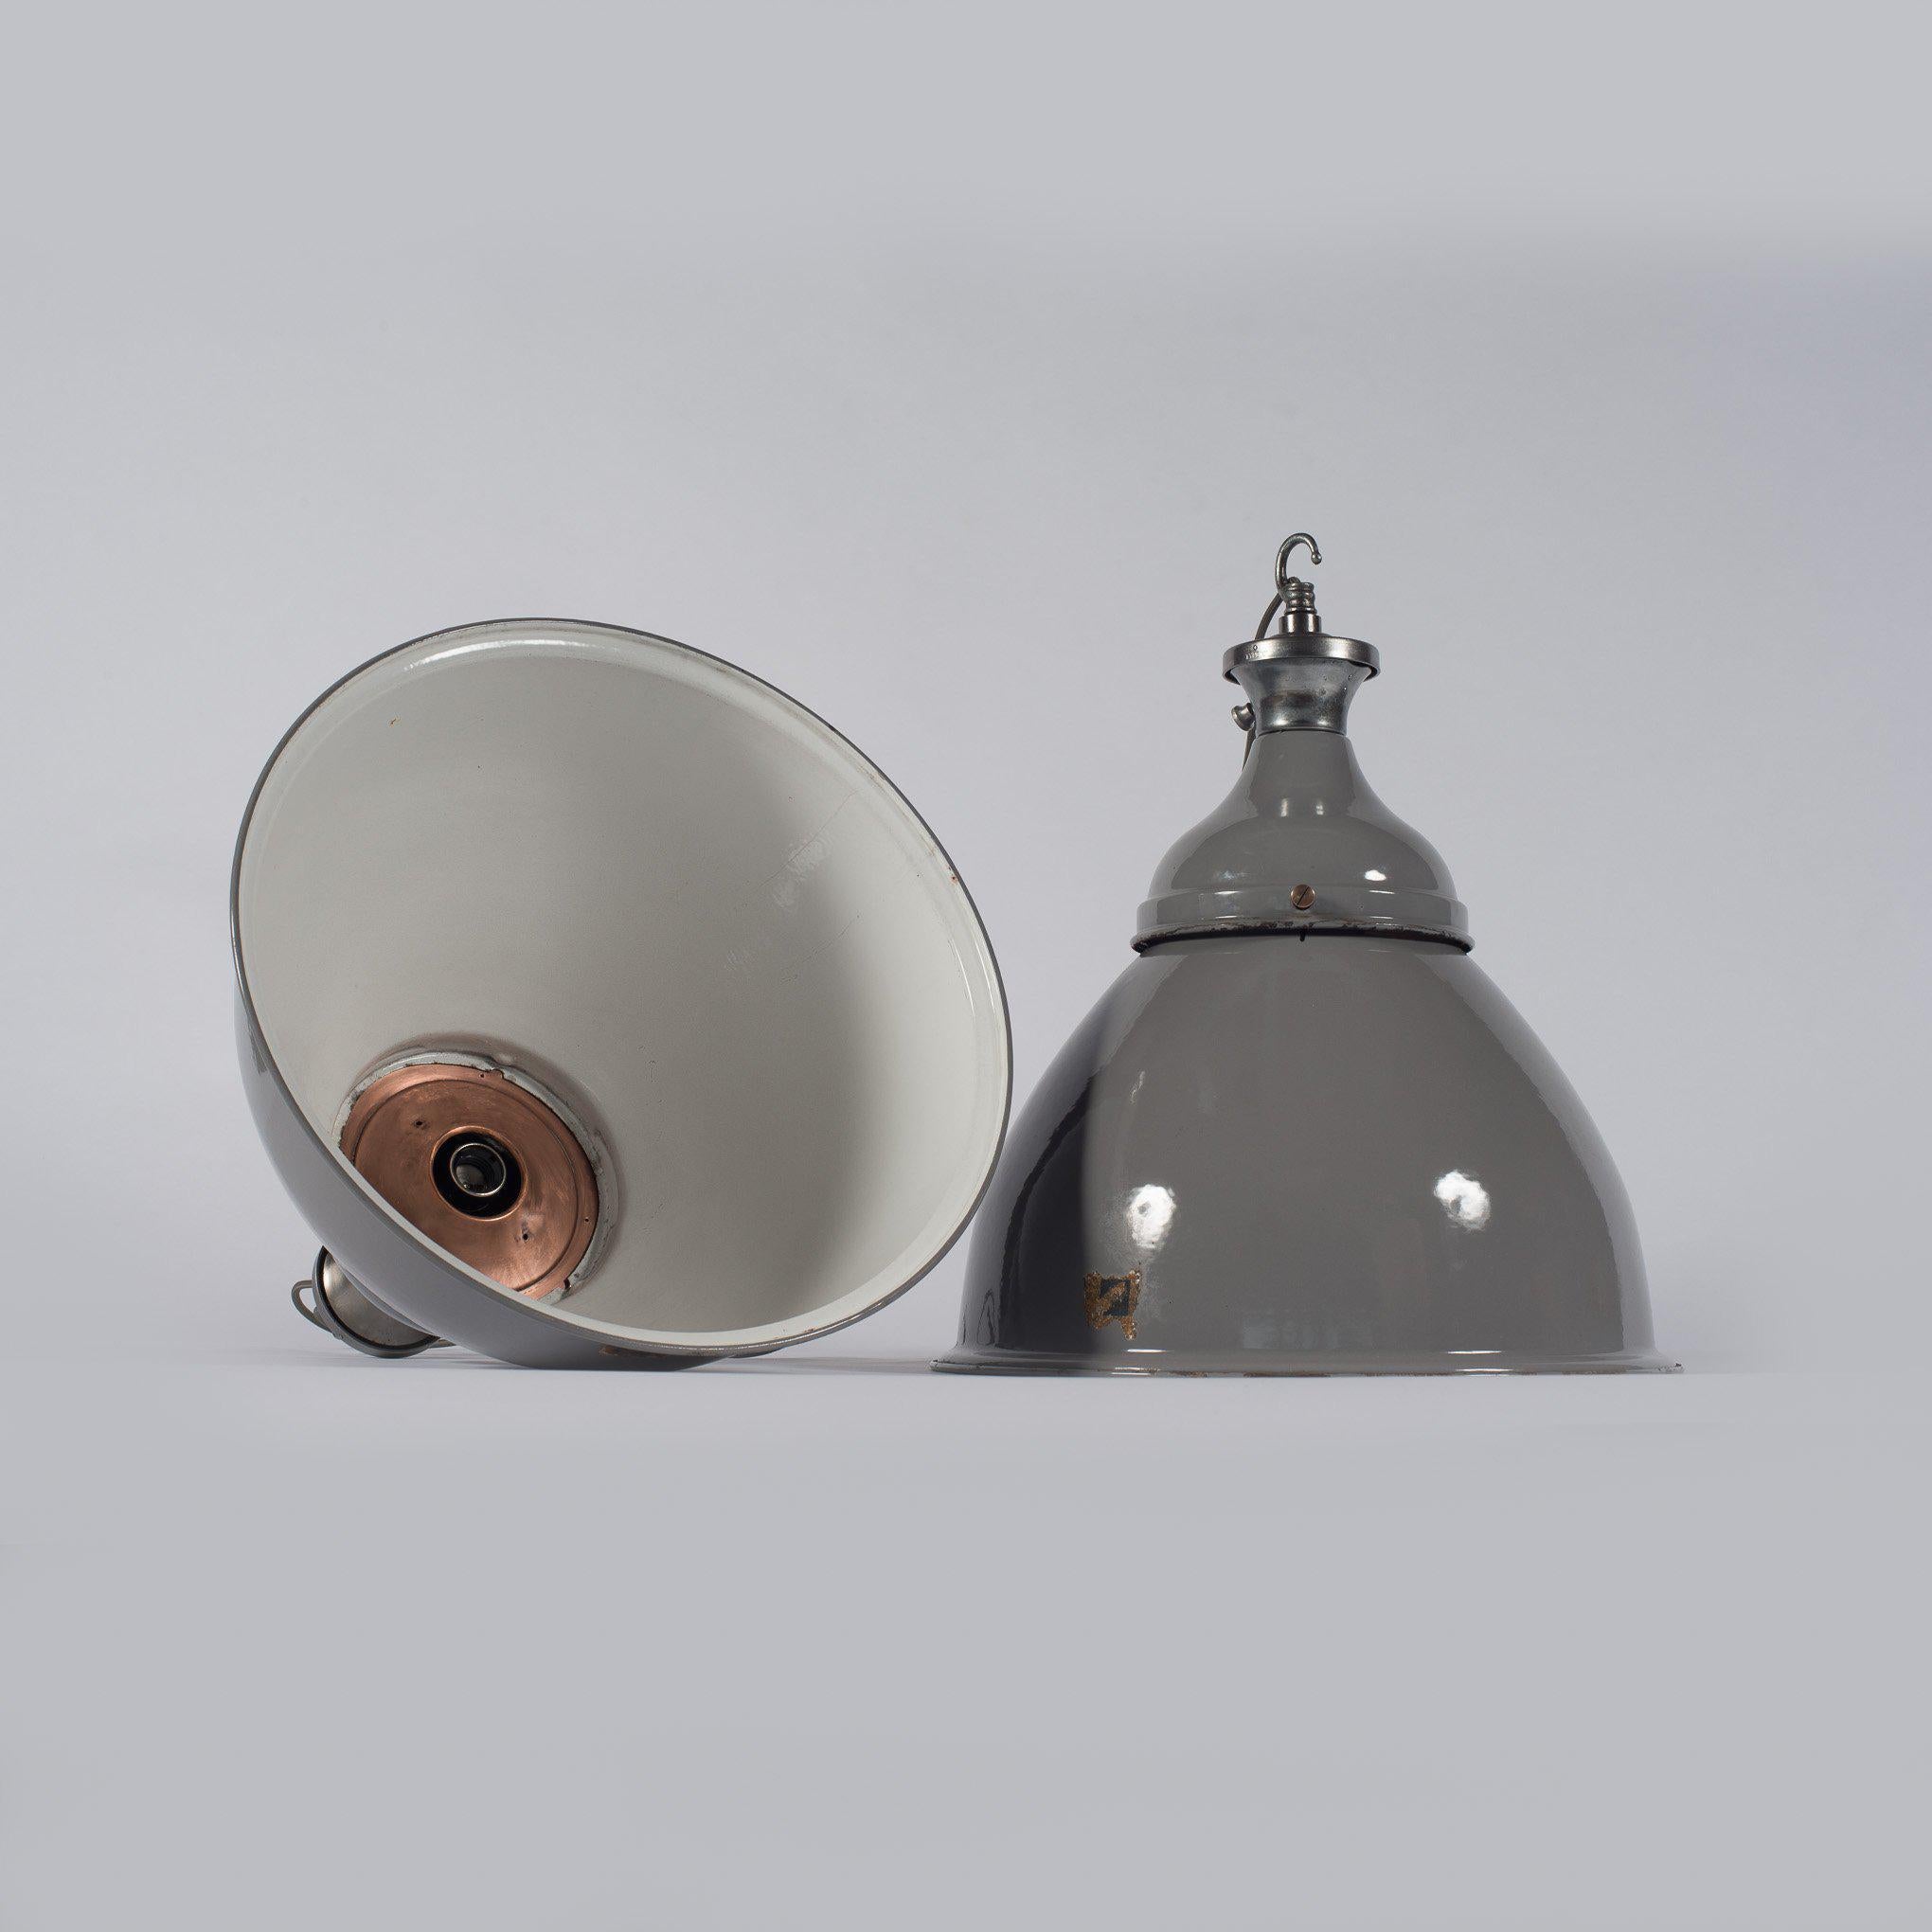 Original vintage industrial pendants of huge proportions with a Double Dome two part design by Great British manufacturer Benjamin Electric Ltd.

These reclaimed factory pendants have a two part domed grey enamel shade design with the trademark